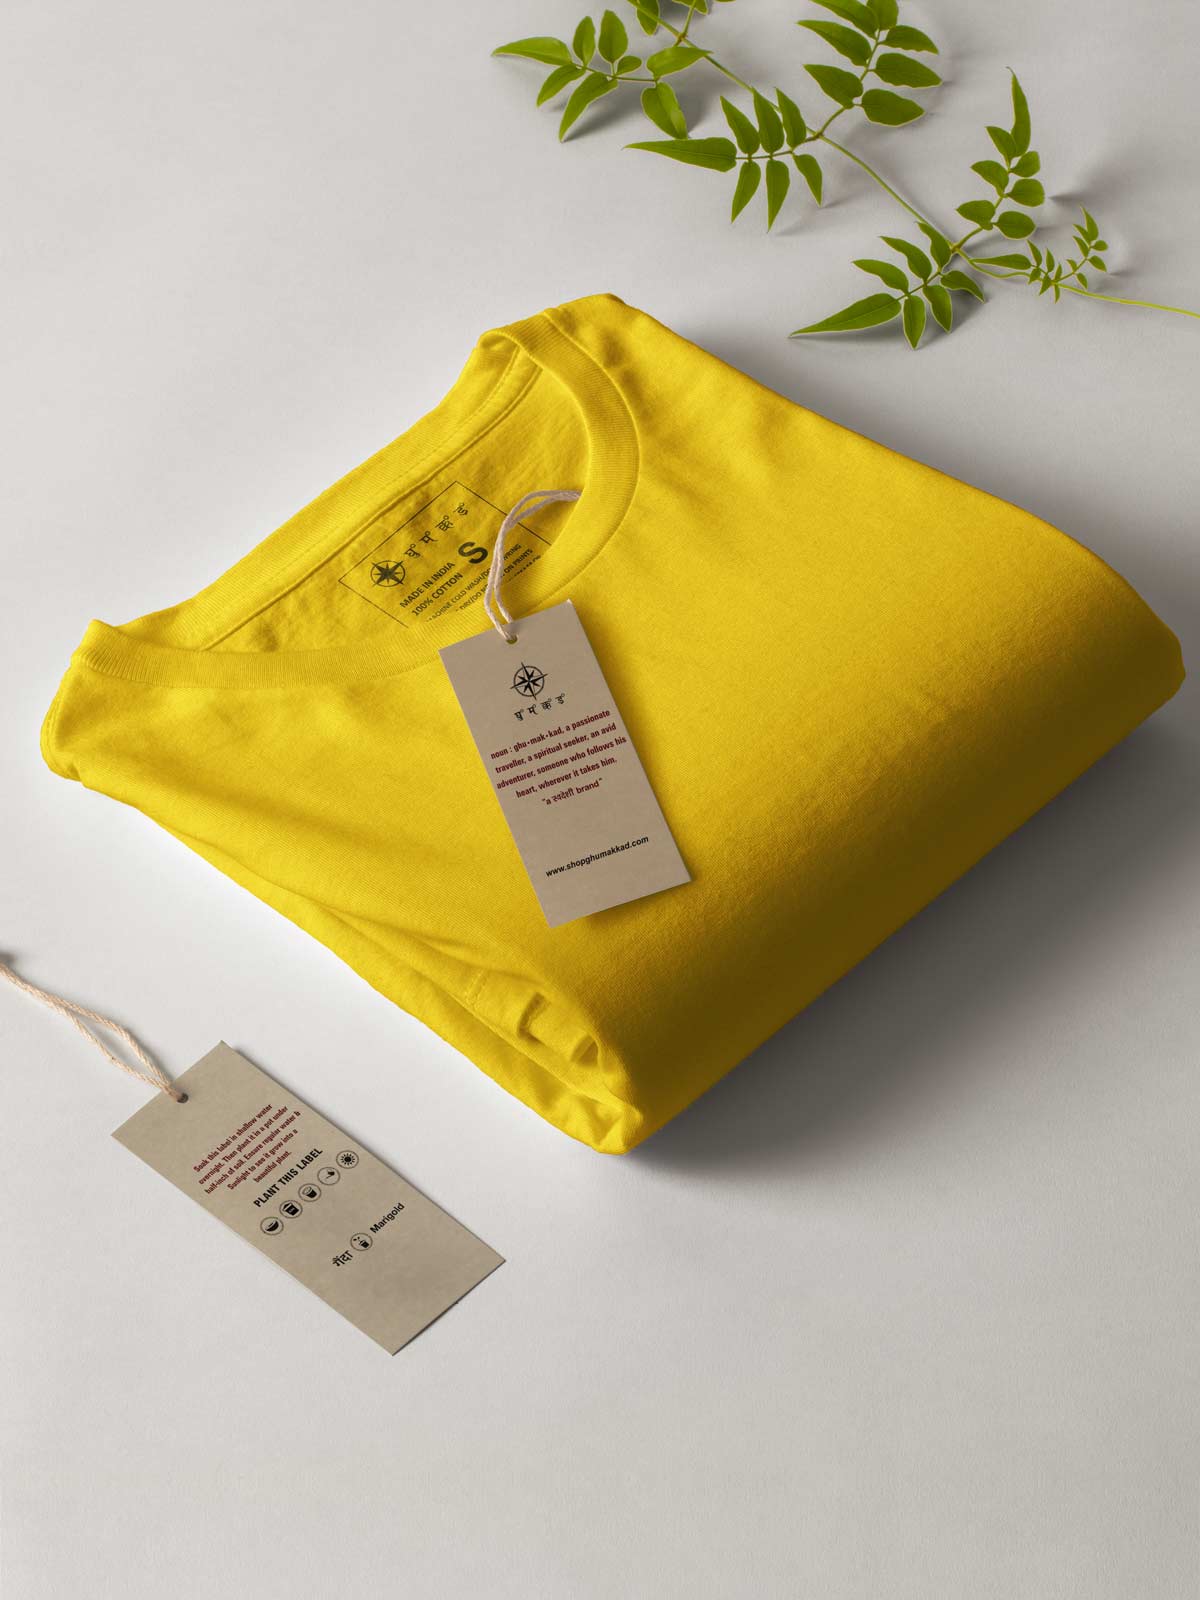 Yellow-t-shirt-for-men by Ghumakkad